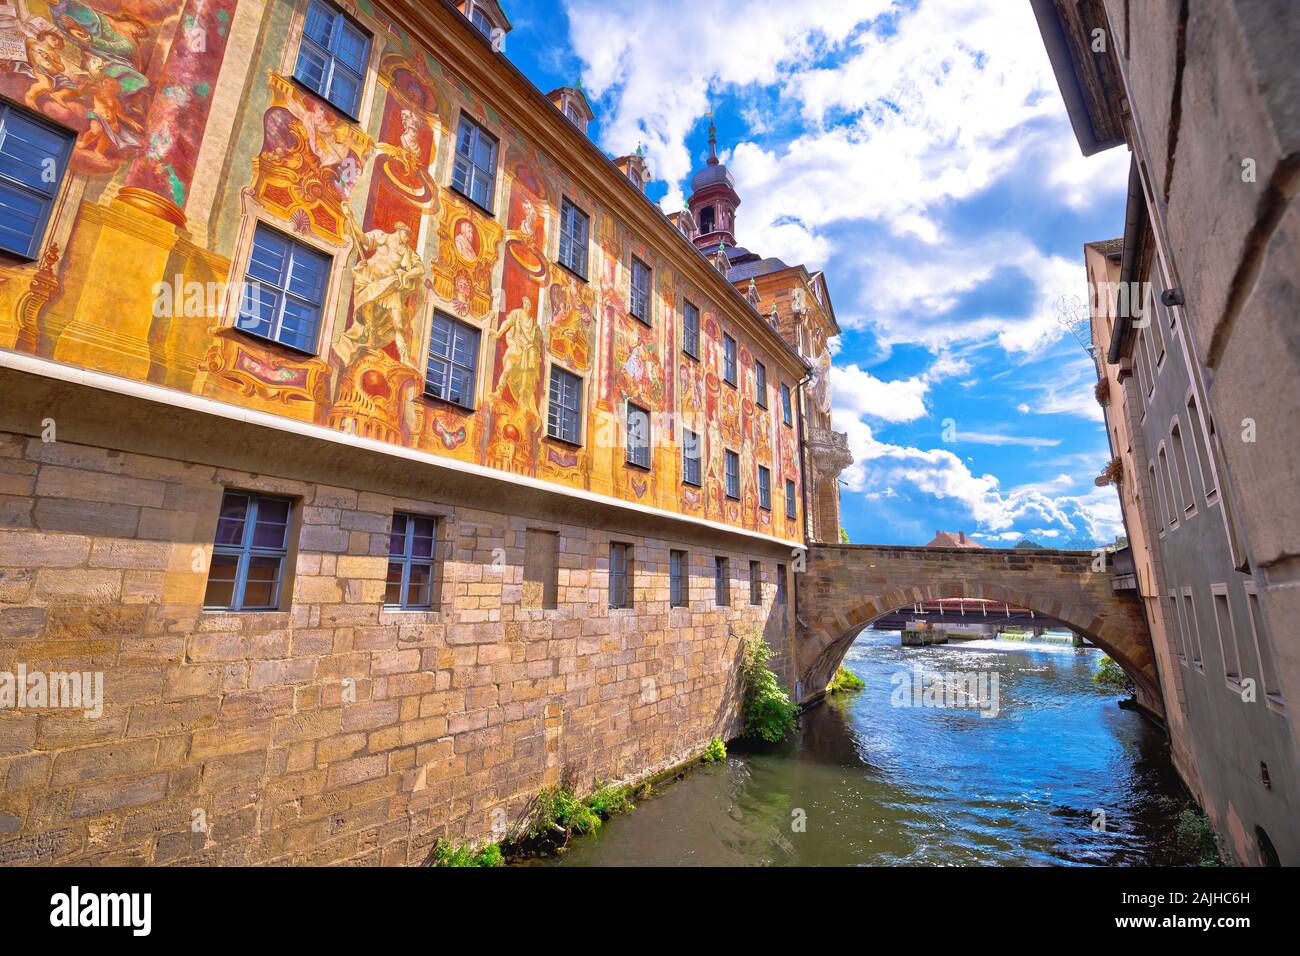 Bamberg. Scenic view of Old Town Hall of Bamberg (Altes Rathaus) with bridges over the Regnitz river, Upper Franconia, Bavaria region of Germany Stock Photo